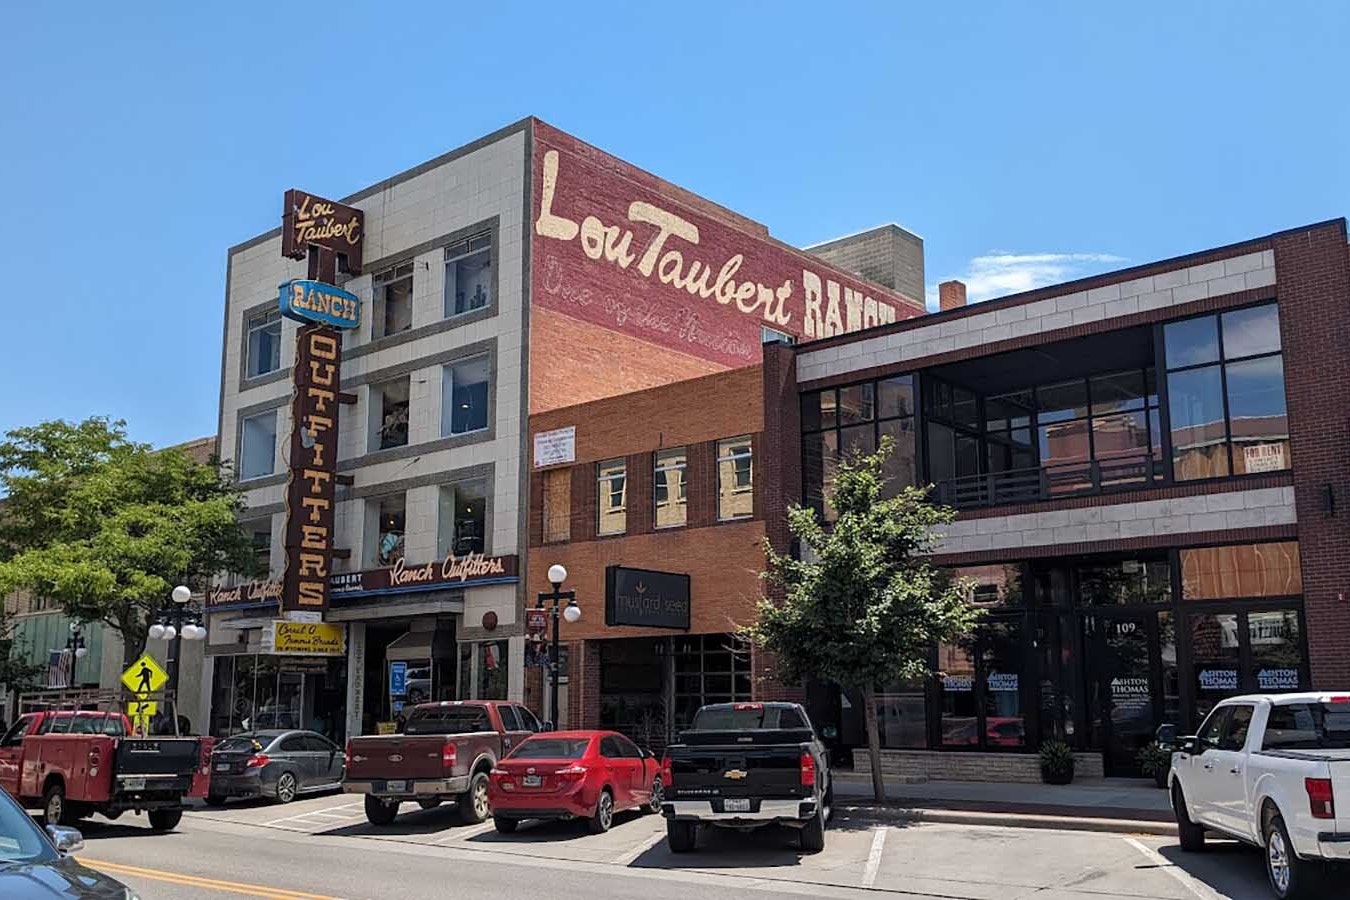 Lou Taubert Ranch Outfitters is an anchor of historic downtown Casper.